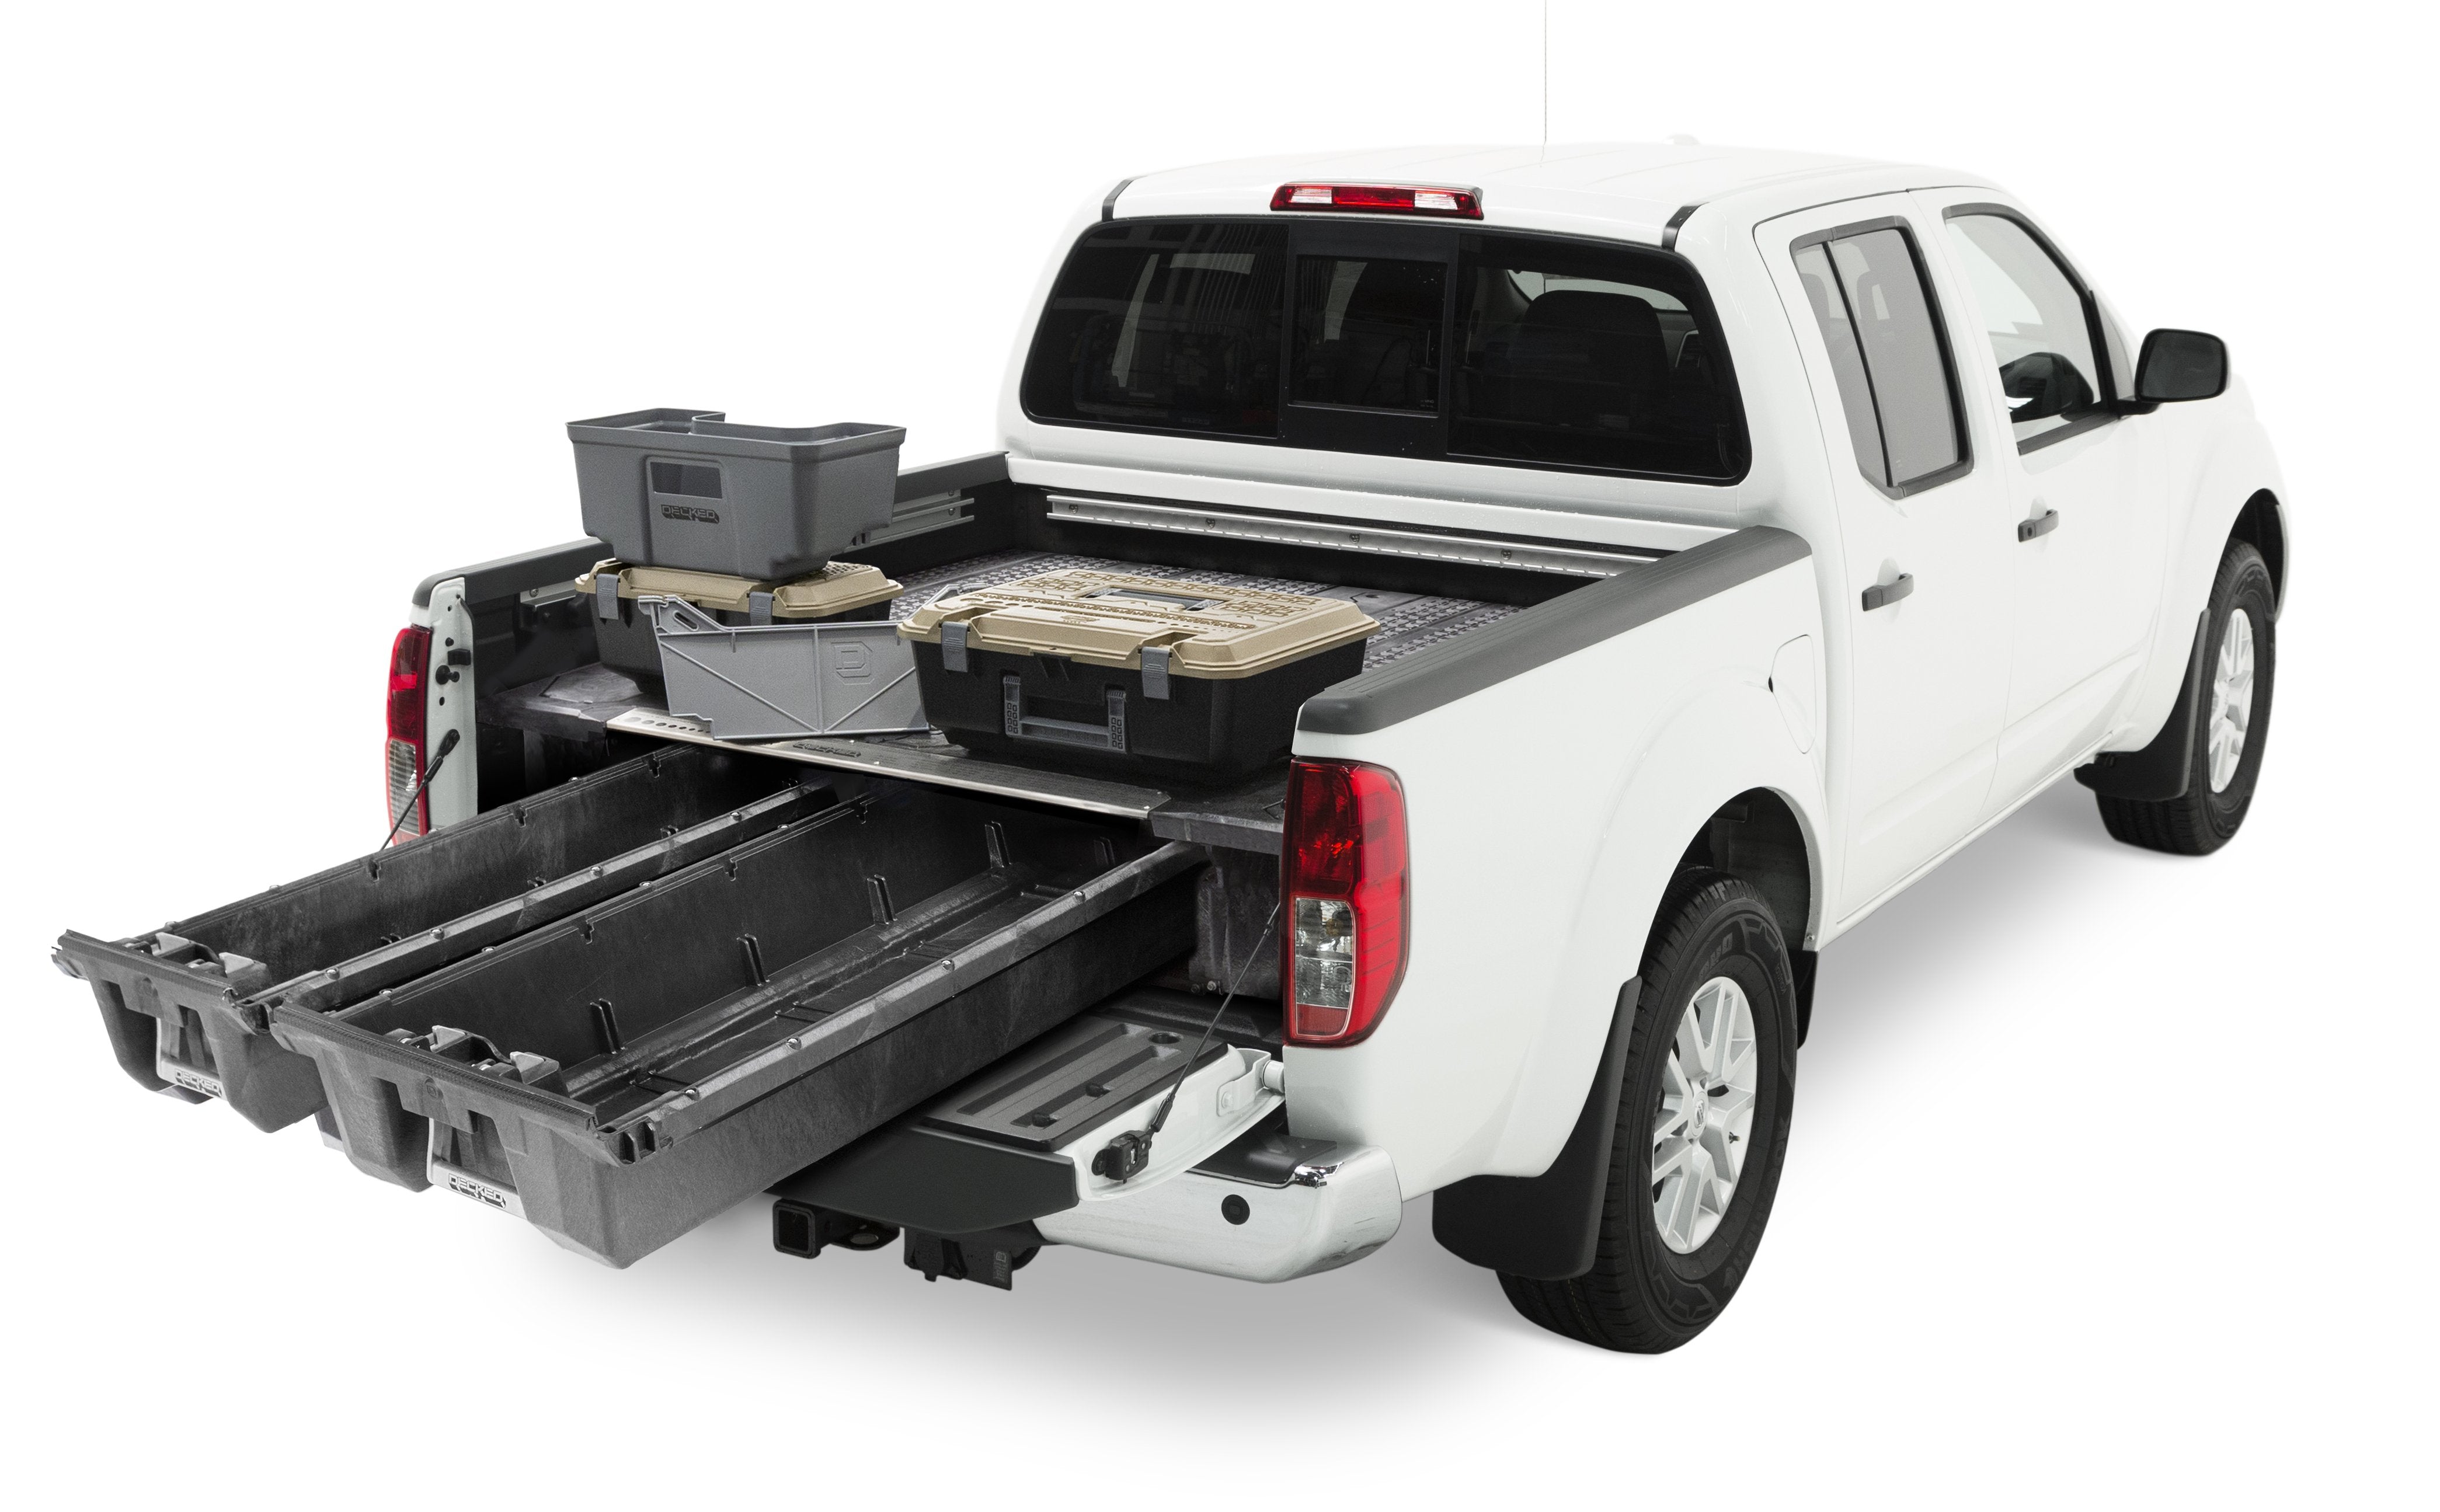 Nissan Truck Bed Storage, Nissan Tool Boxes & Nissan Accessories DECKED